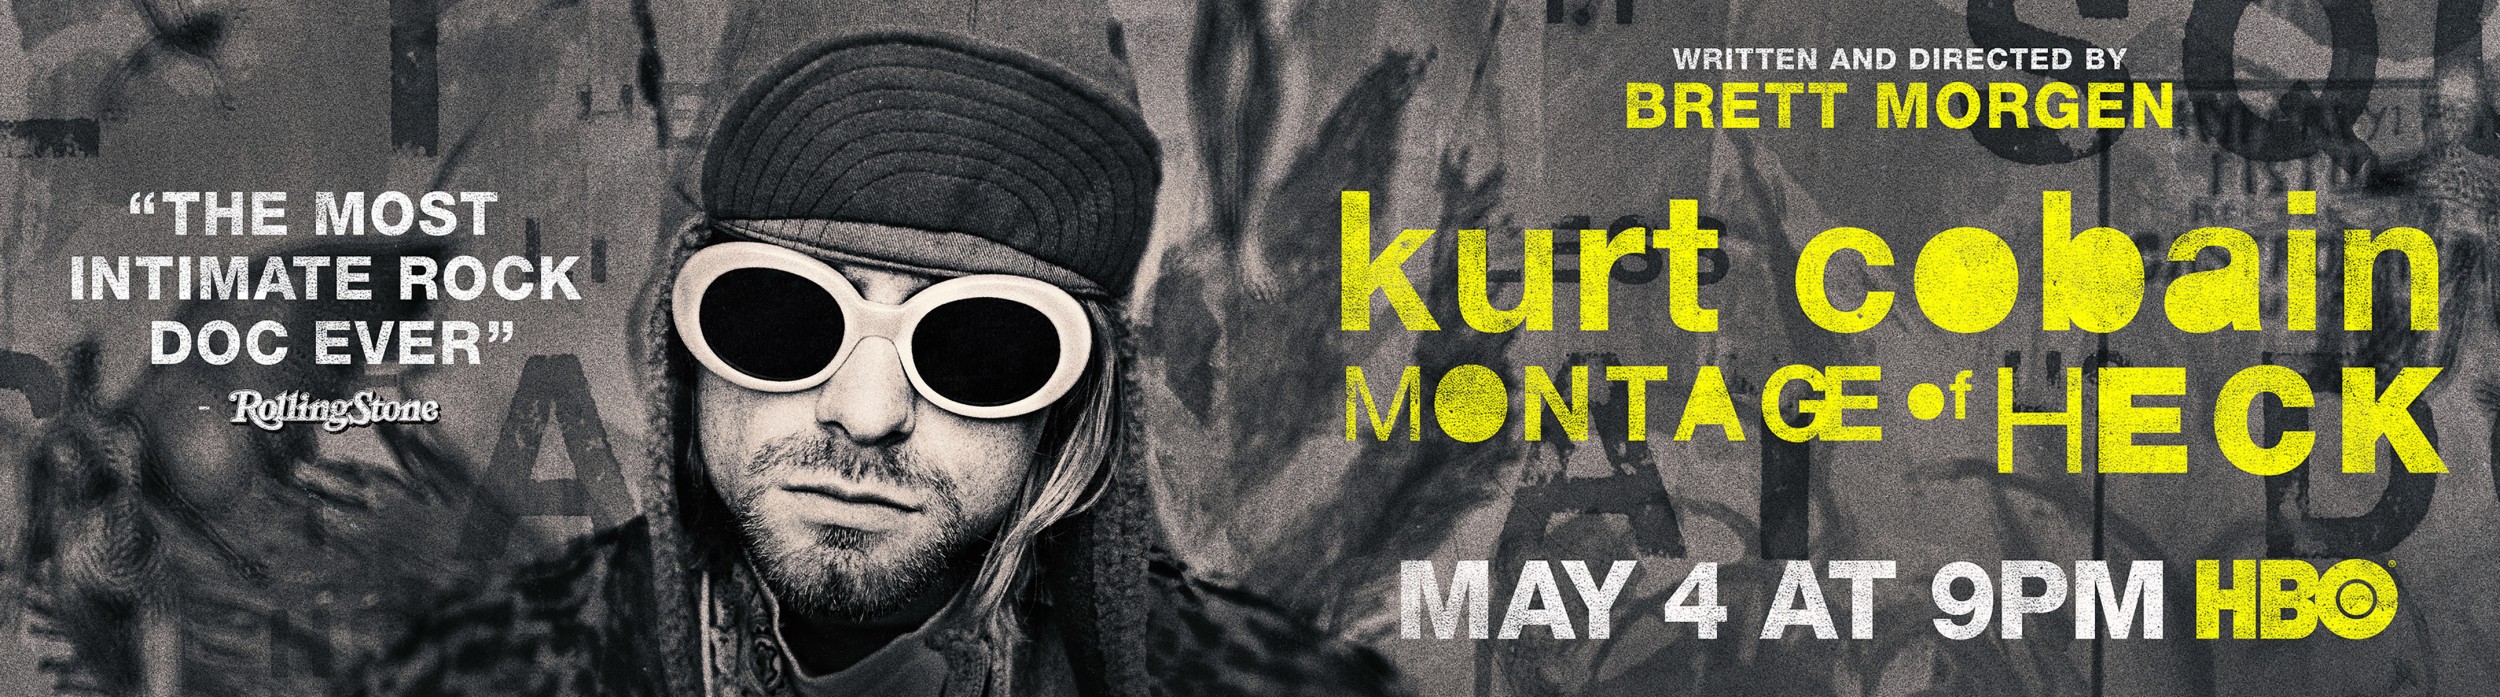 Mega Sized Movie Poster Image for Kurt Cobain: Montage of Heck (#3 of 3)